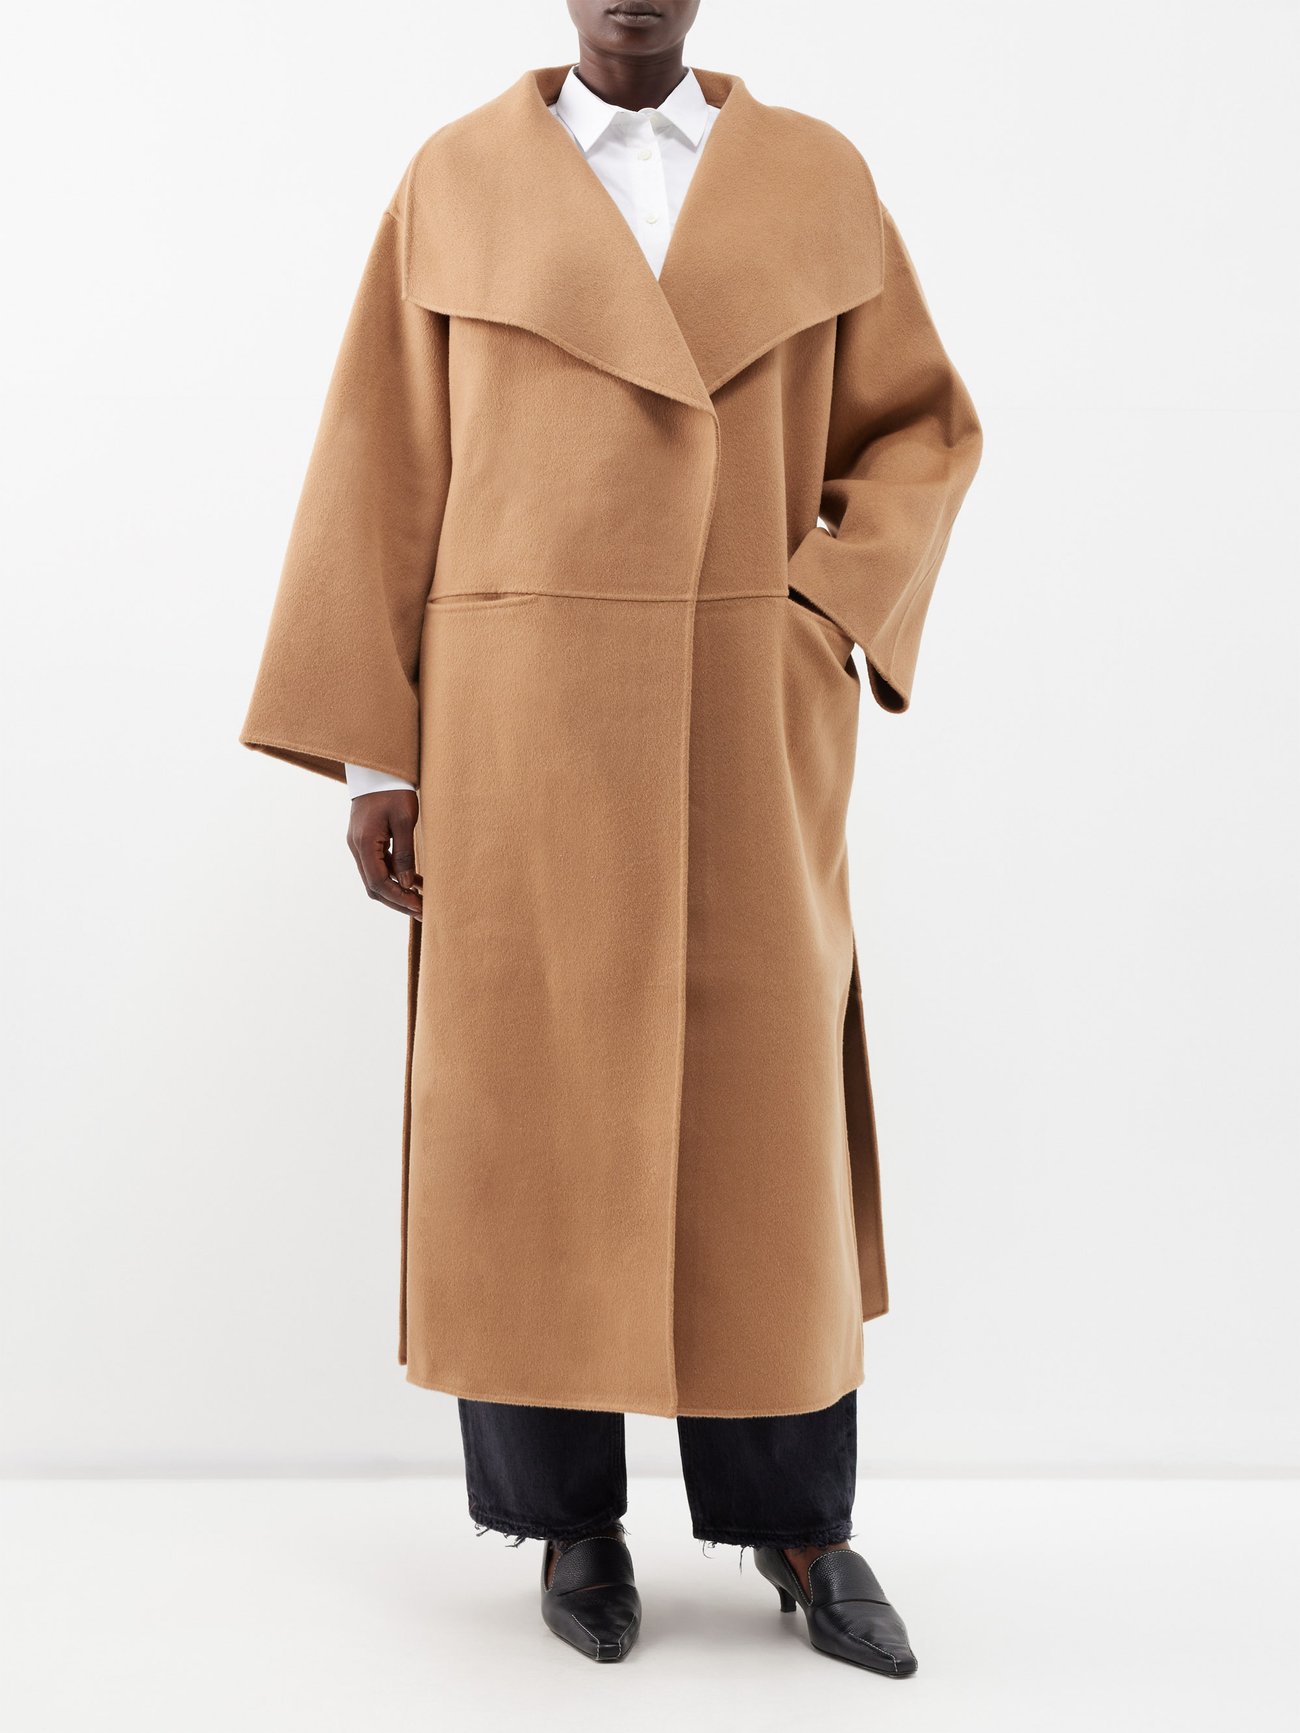 28 of the Best Camel Coats That Come Editor Approved | Who What Wear UK